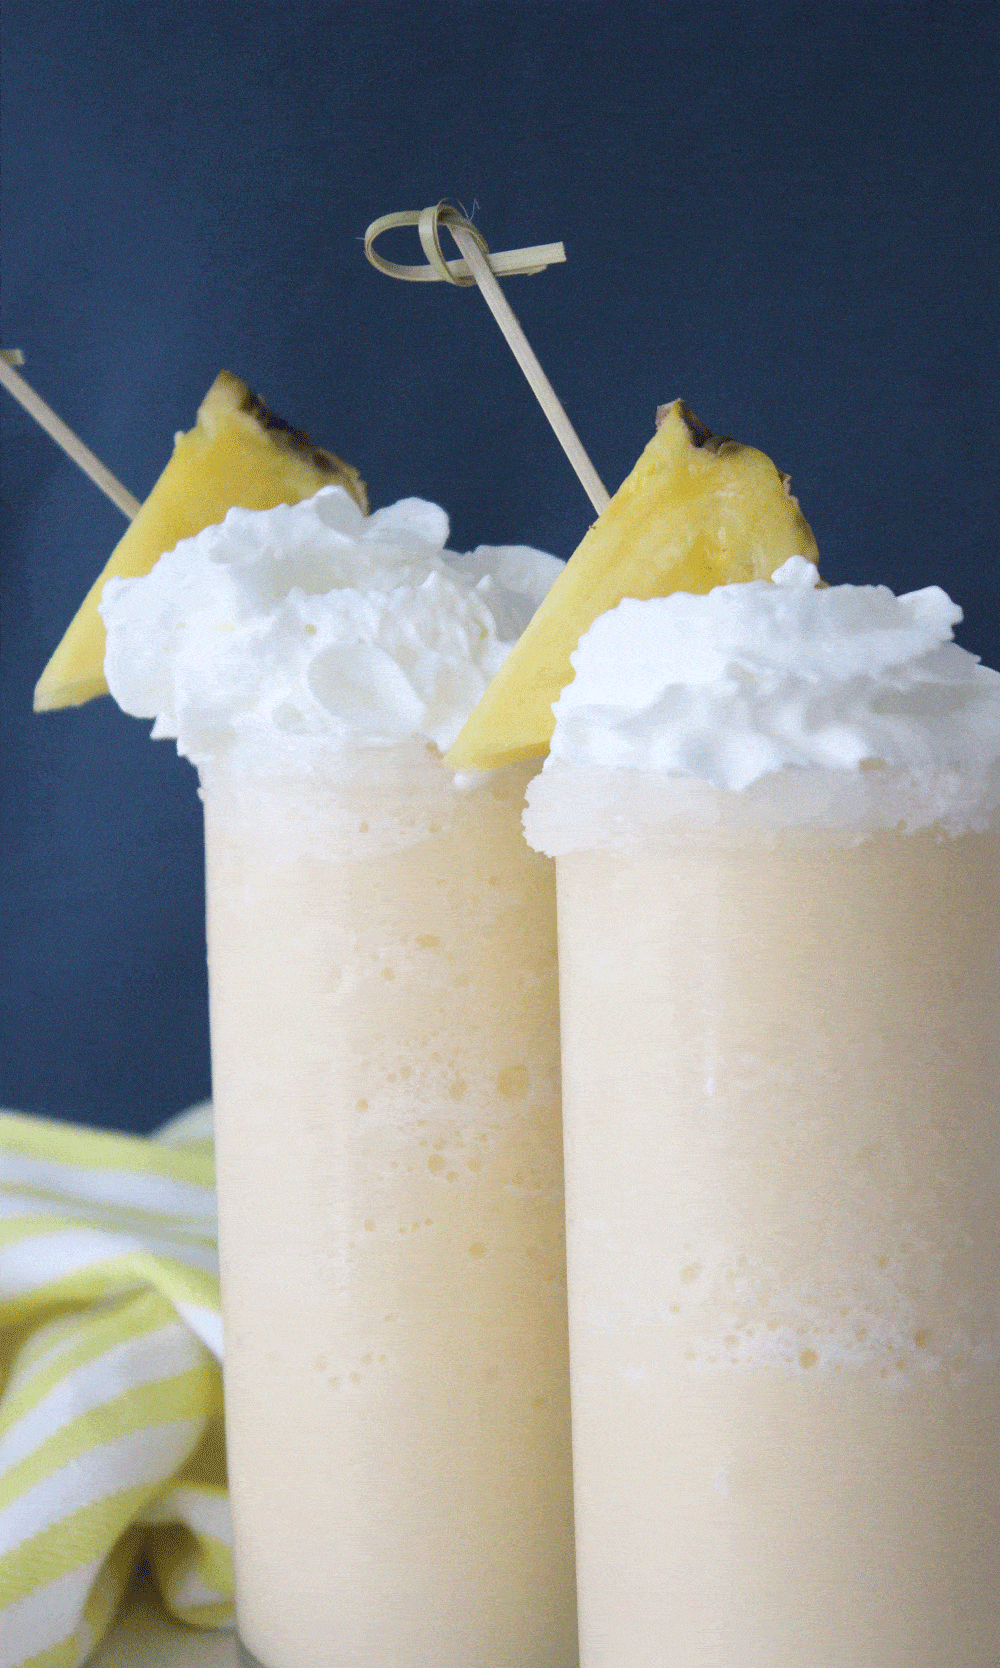 up close of two pina colada slushes in clear glasses against a navy background